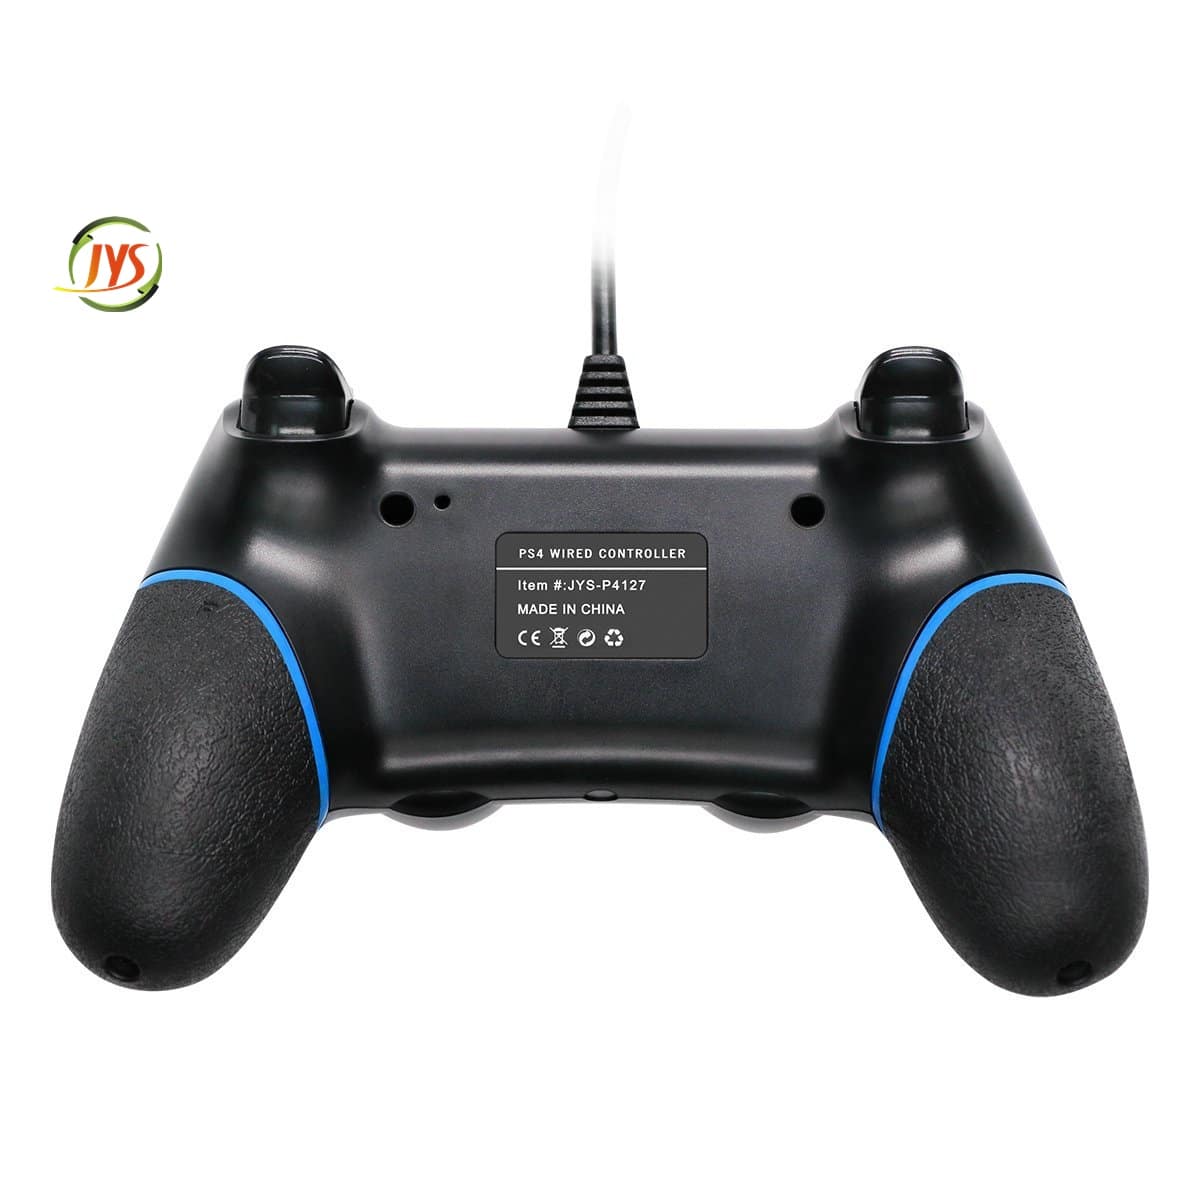 Connect ps4 controller to pc via usb